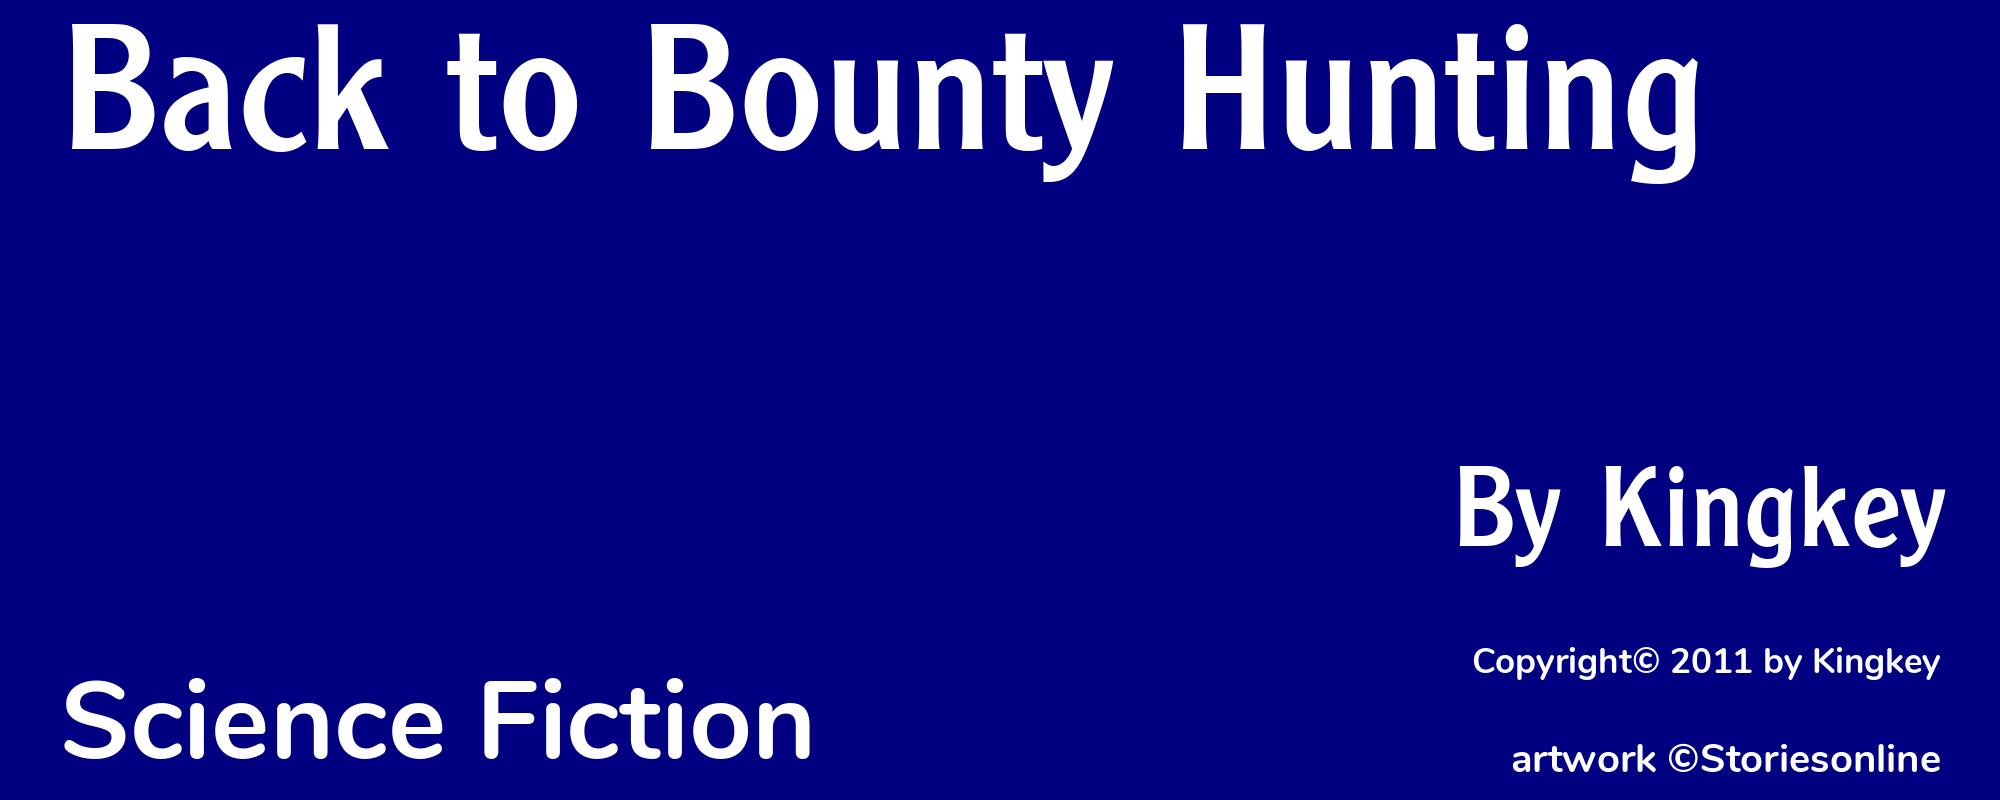 Back to Bounty Hunting - Cover